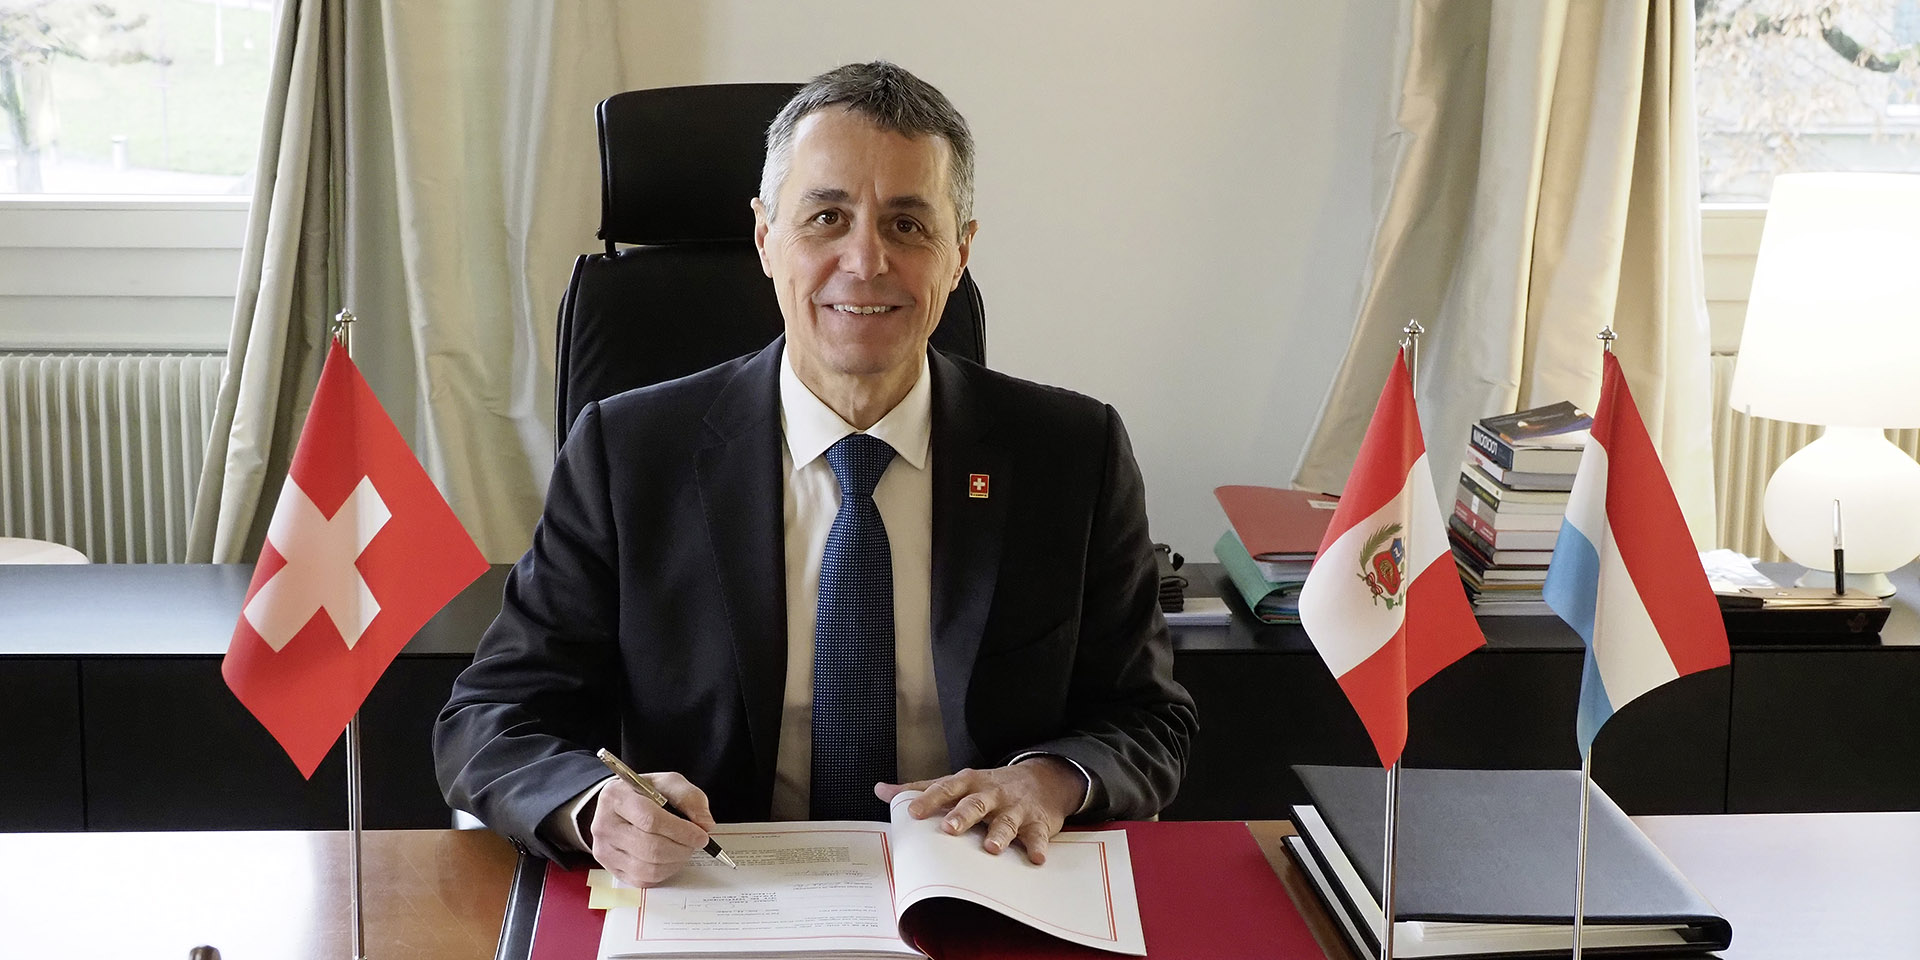 Federal Councillor Ignazio Cassis signs a document. On his desk appear the flags of Switzerland (on his right), Peru and Luxembourg (on his left).